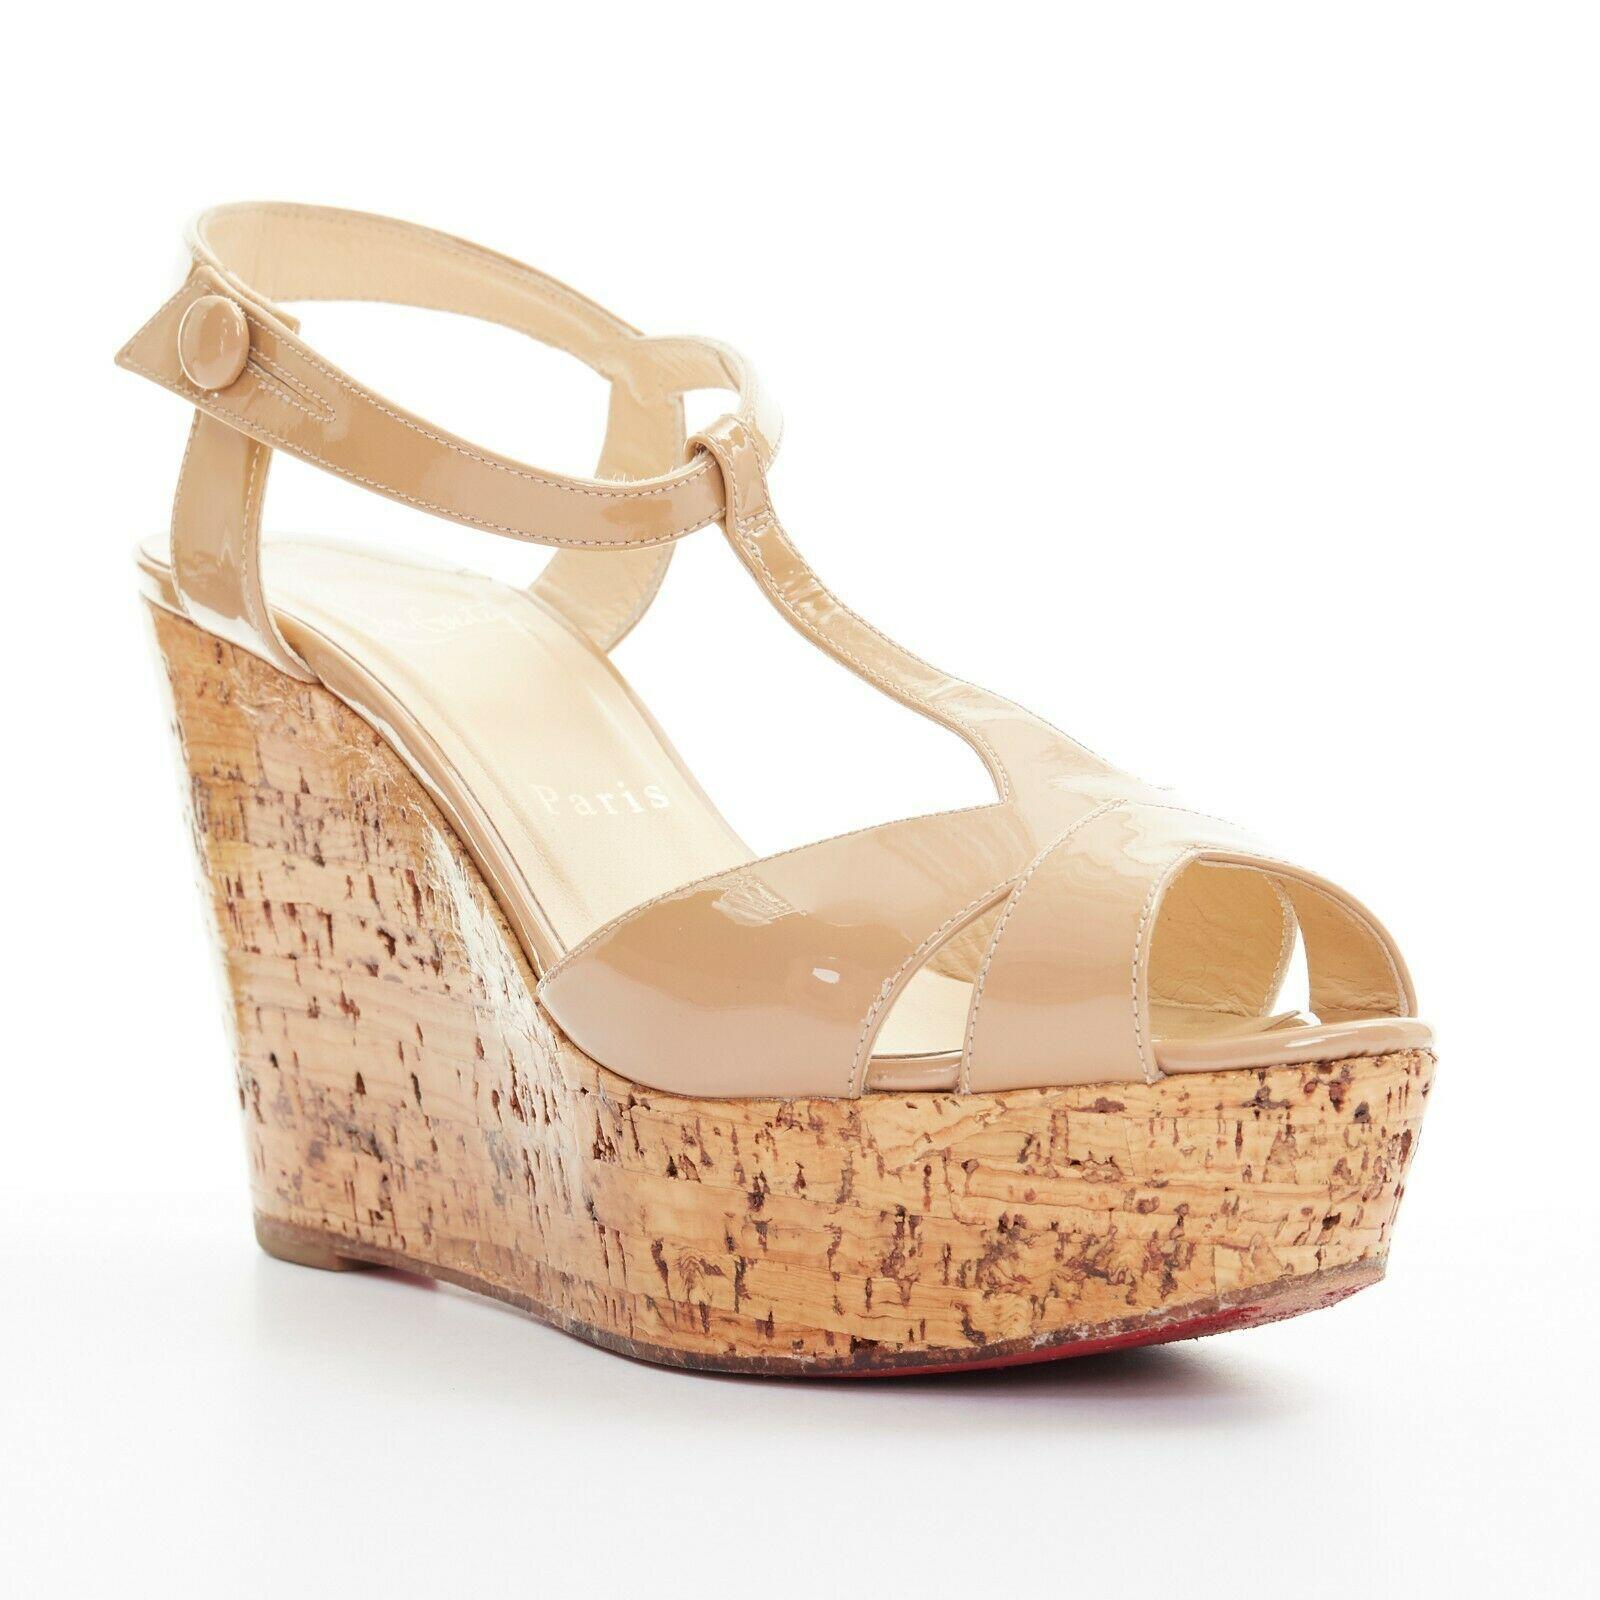 CHRISTIAN LOUBOUTIN nude patent T-strap peep lacquared cork wedge heel EU36.5
CHRISTIAN LOUBOUTIN
Nude patent leather upper. 
Peep toe. T-strap fornt. 
Ankle strap. Button side closure. 
Lacquared cork platform wedge. 
Tonal stitching. Padded tan